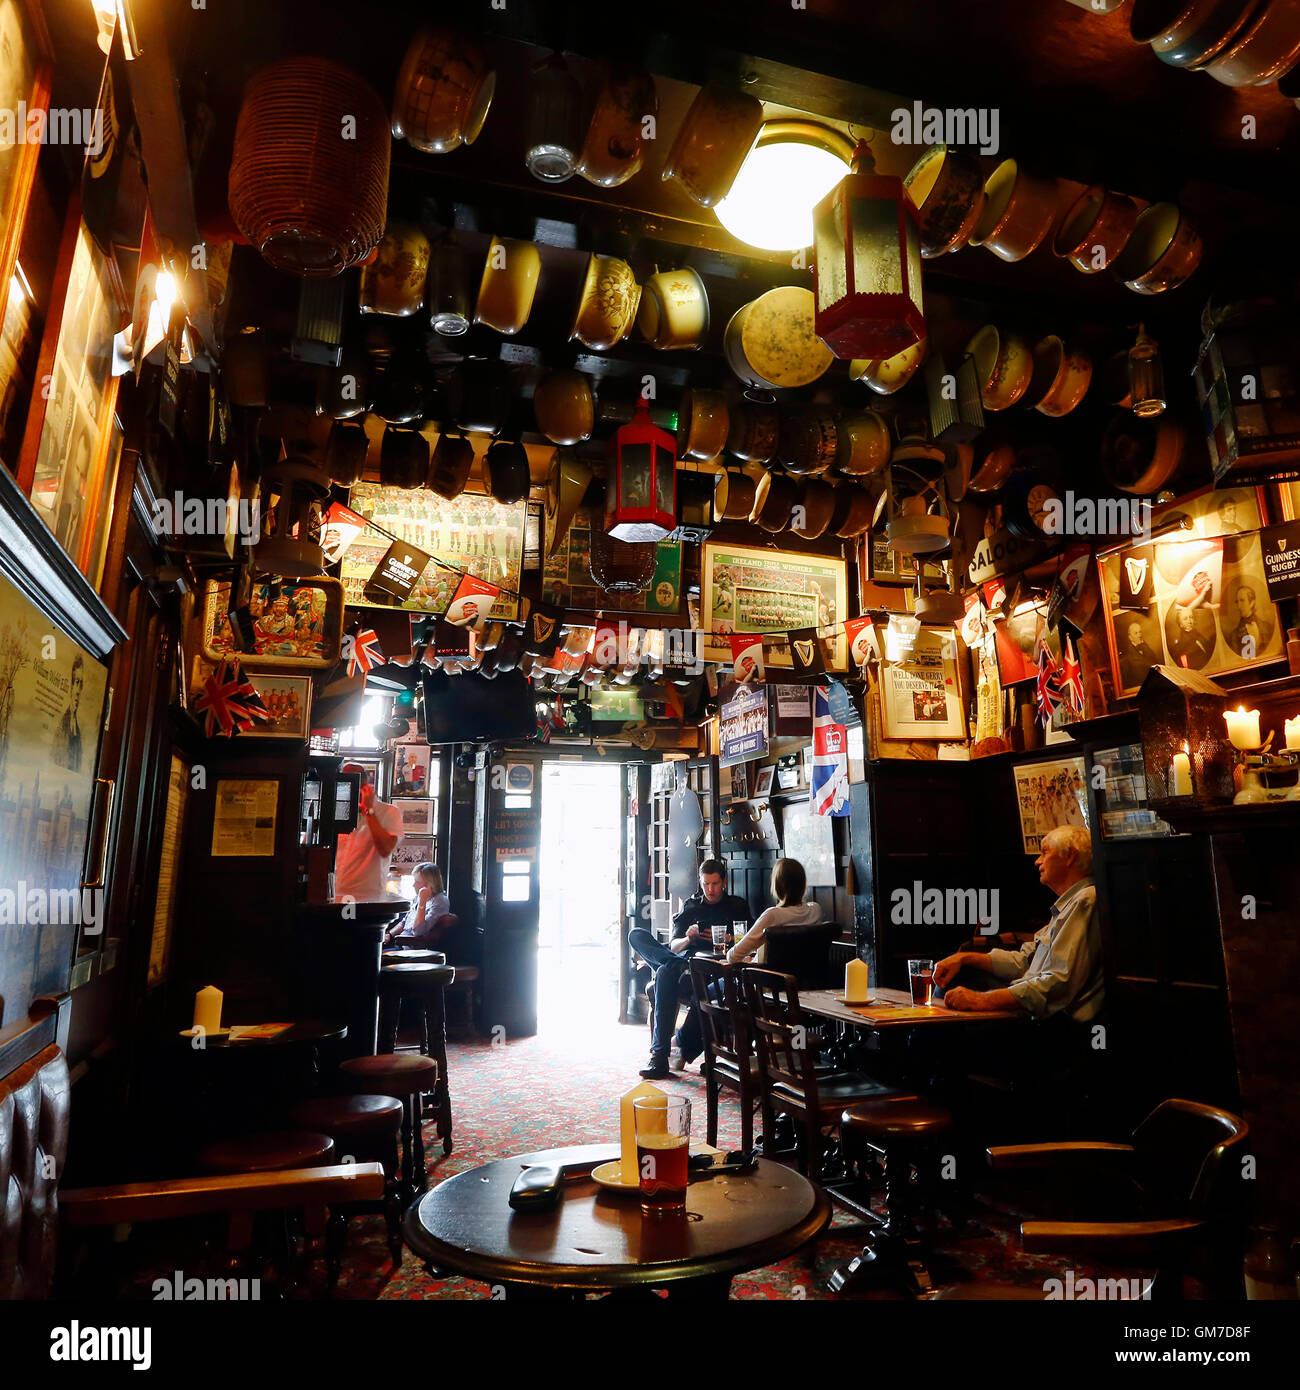 London, UK - May 7, 2016: Inside view of a public house, known as pub, for drinking and socializing, is the focal point of the c Stock Photo